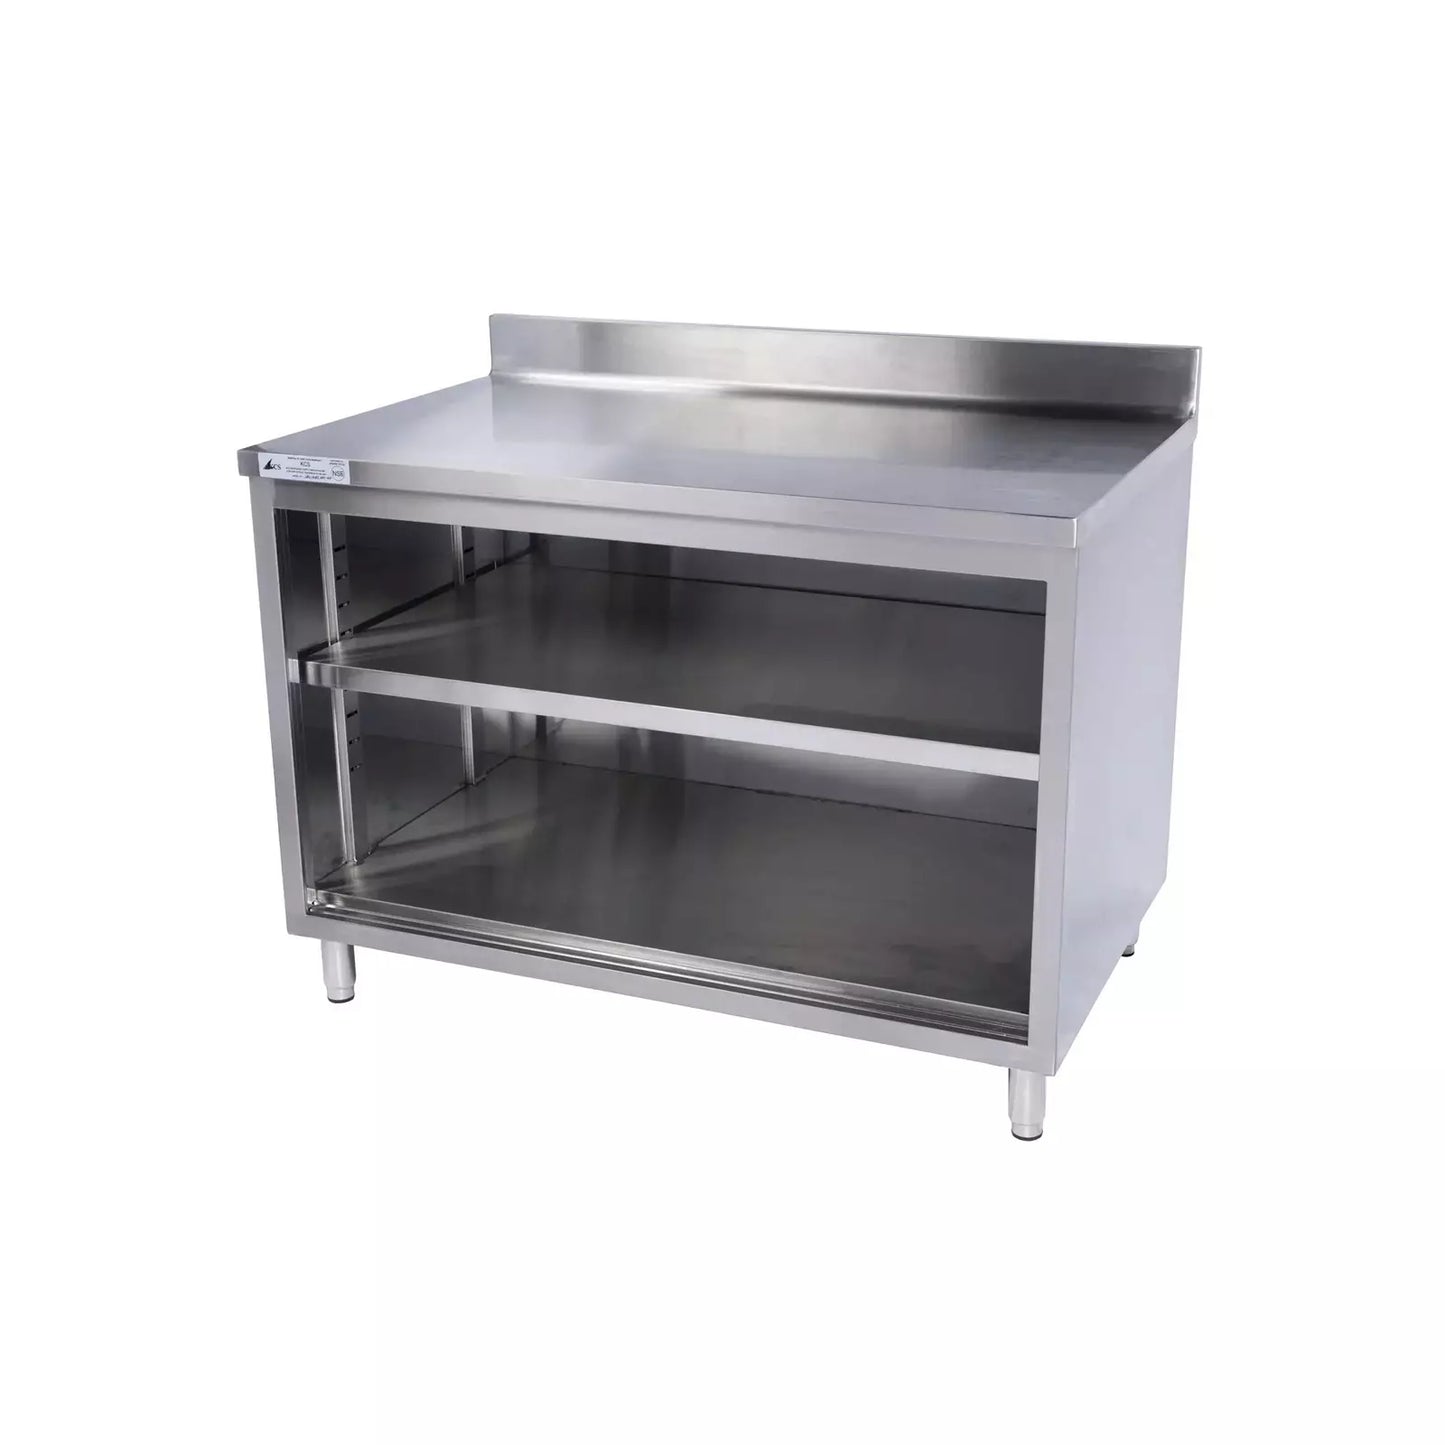 KCS CBS-3048-4BSWO 30" x 48" Stainless Steel Storage Welded Cabinet Open Front with 4" Backsplash